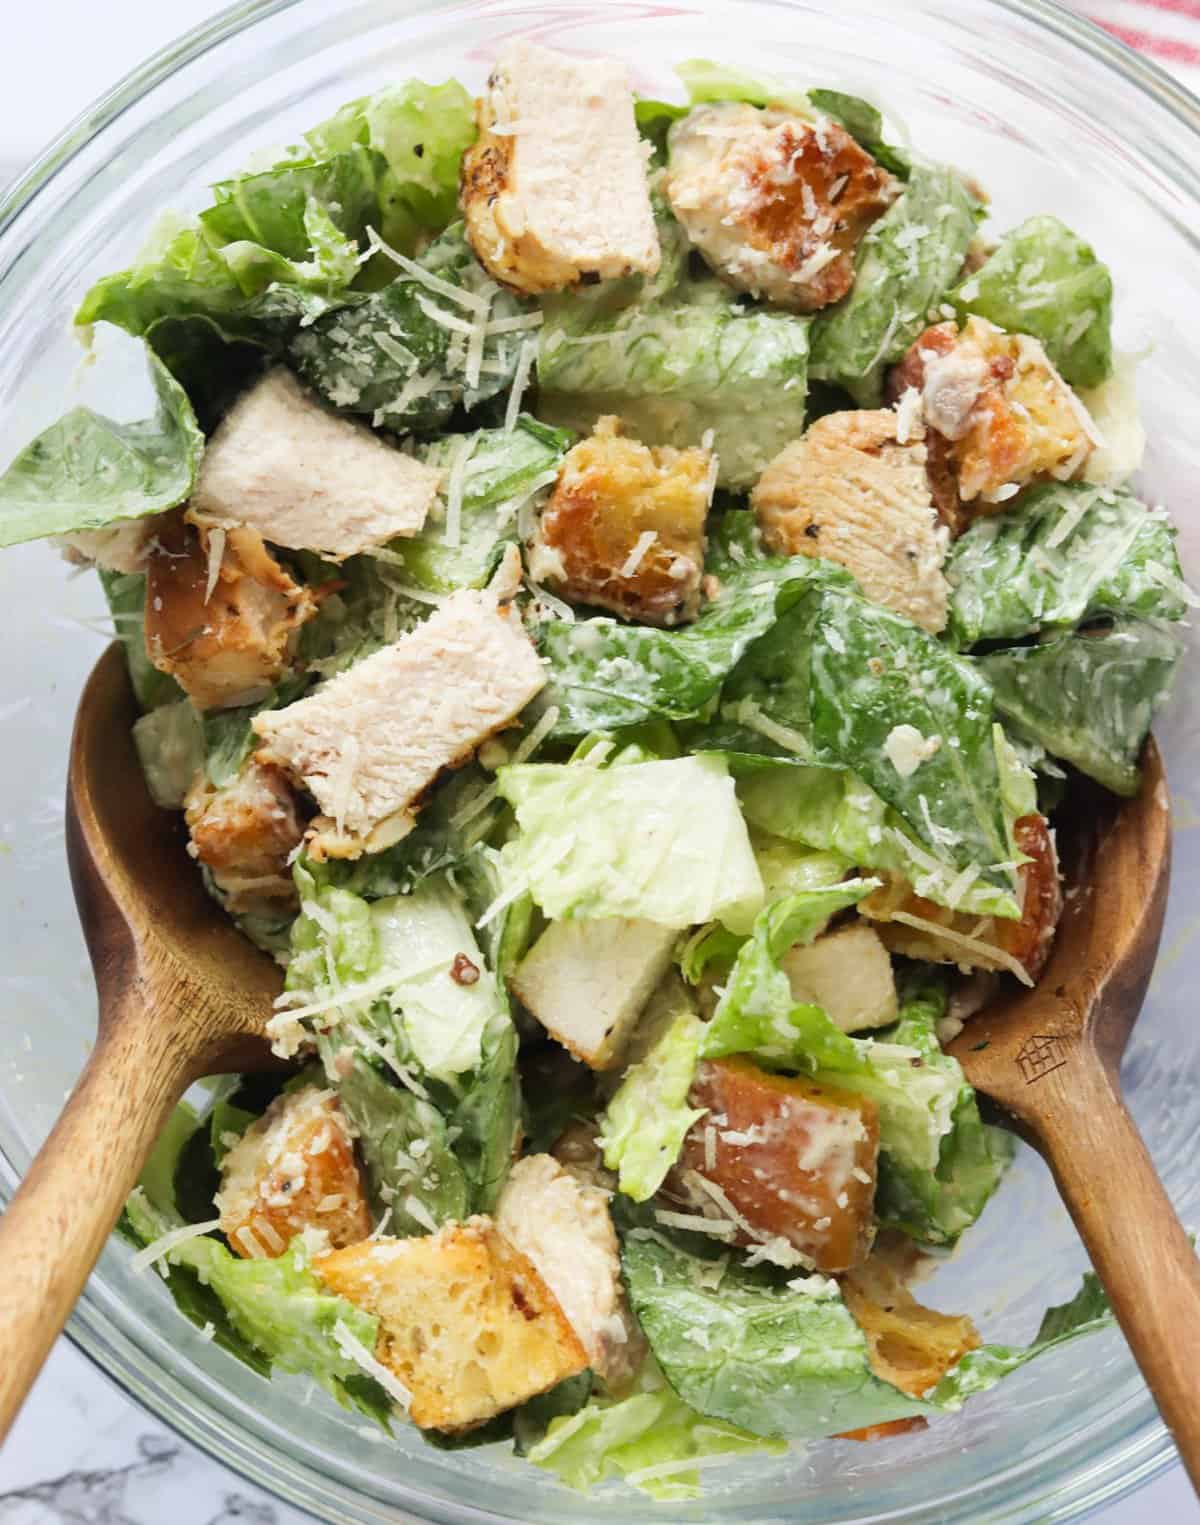 Tossing the the chicken caesar salad